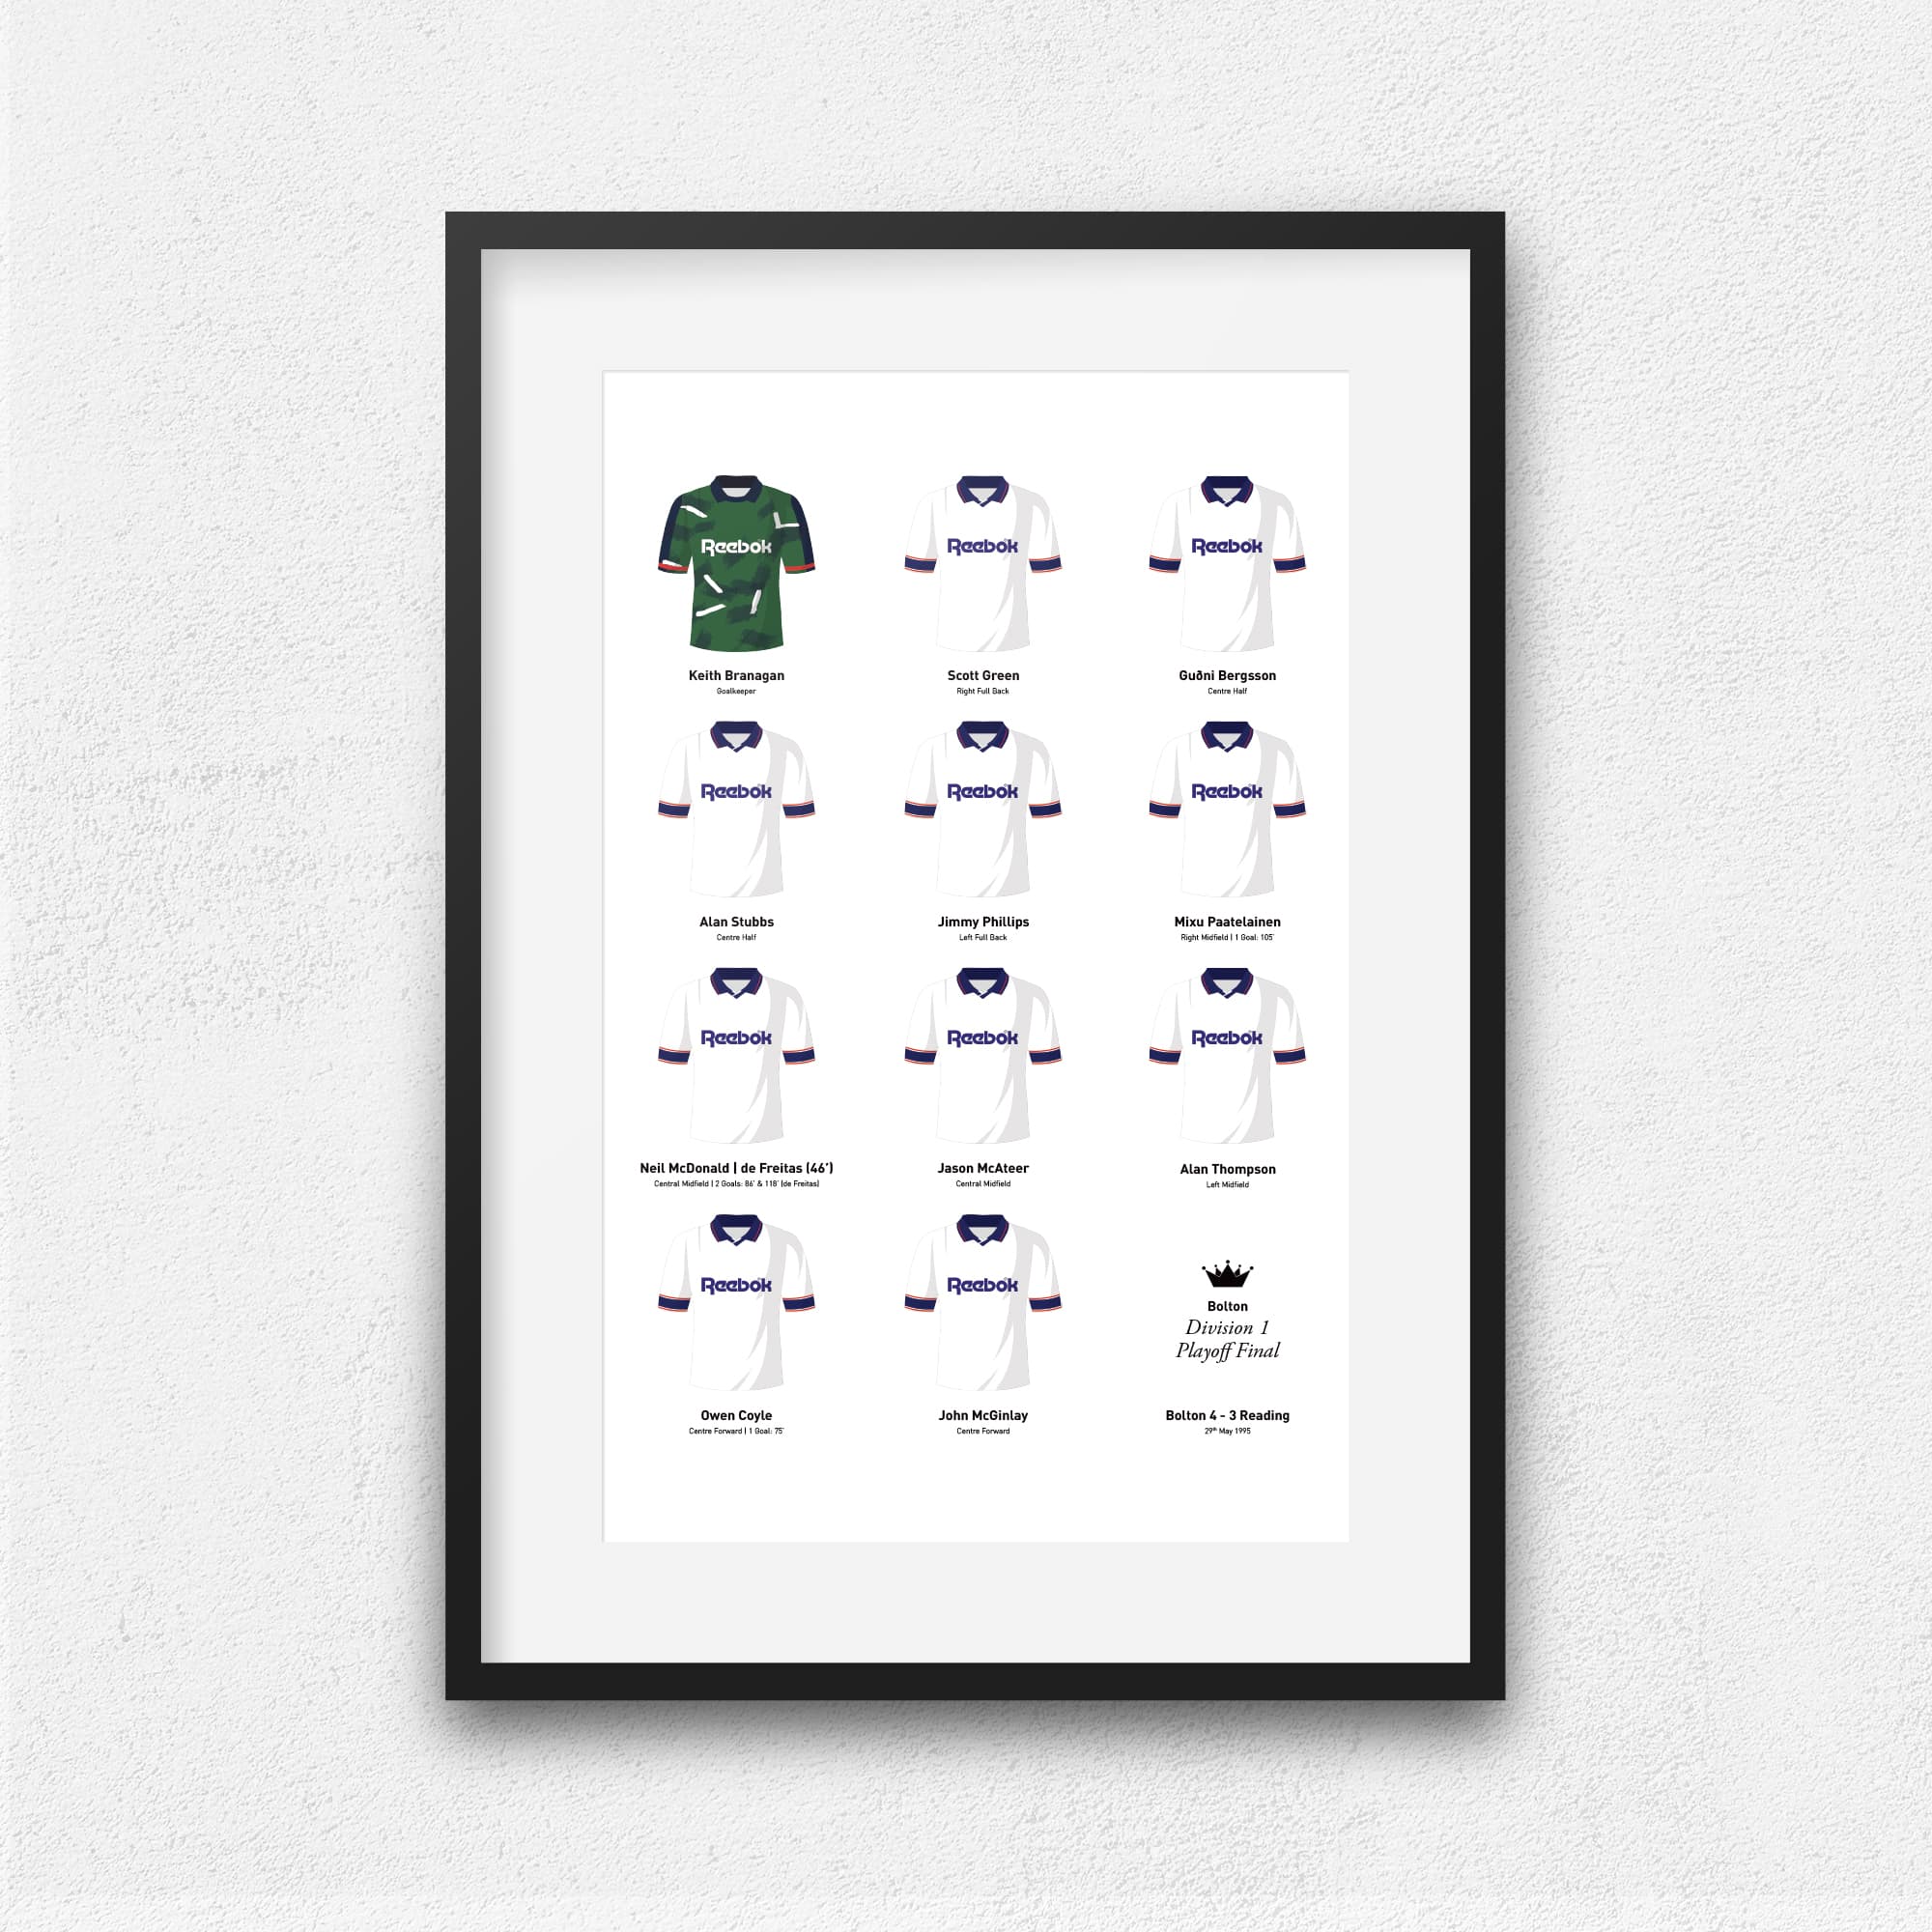 Bolton 1995 Division 1 Playoff Final Winners Football Team Print Good Team On Paper